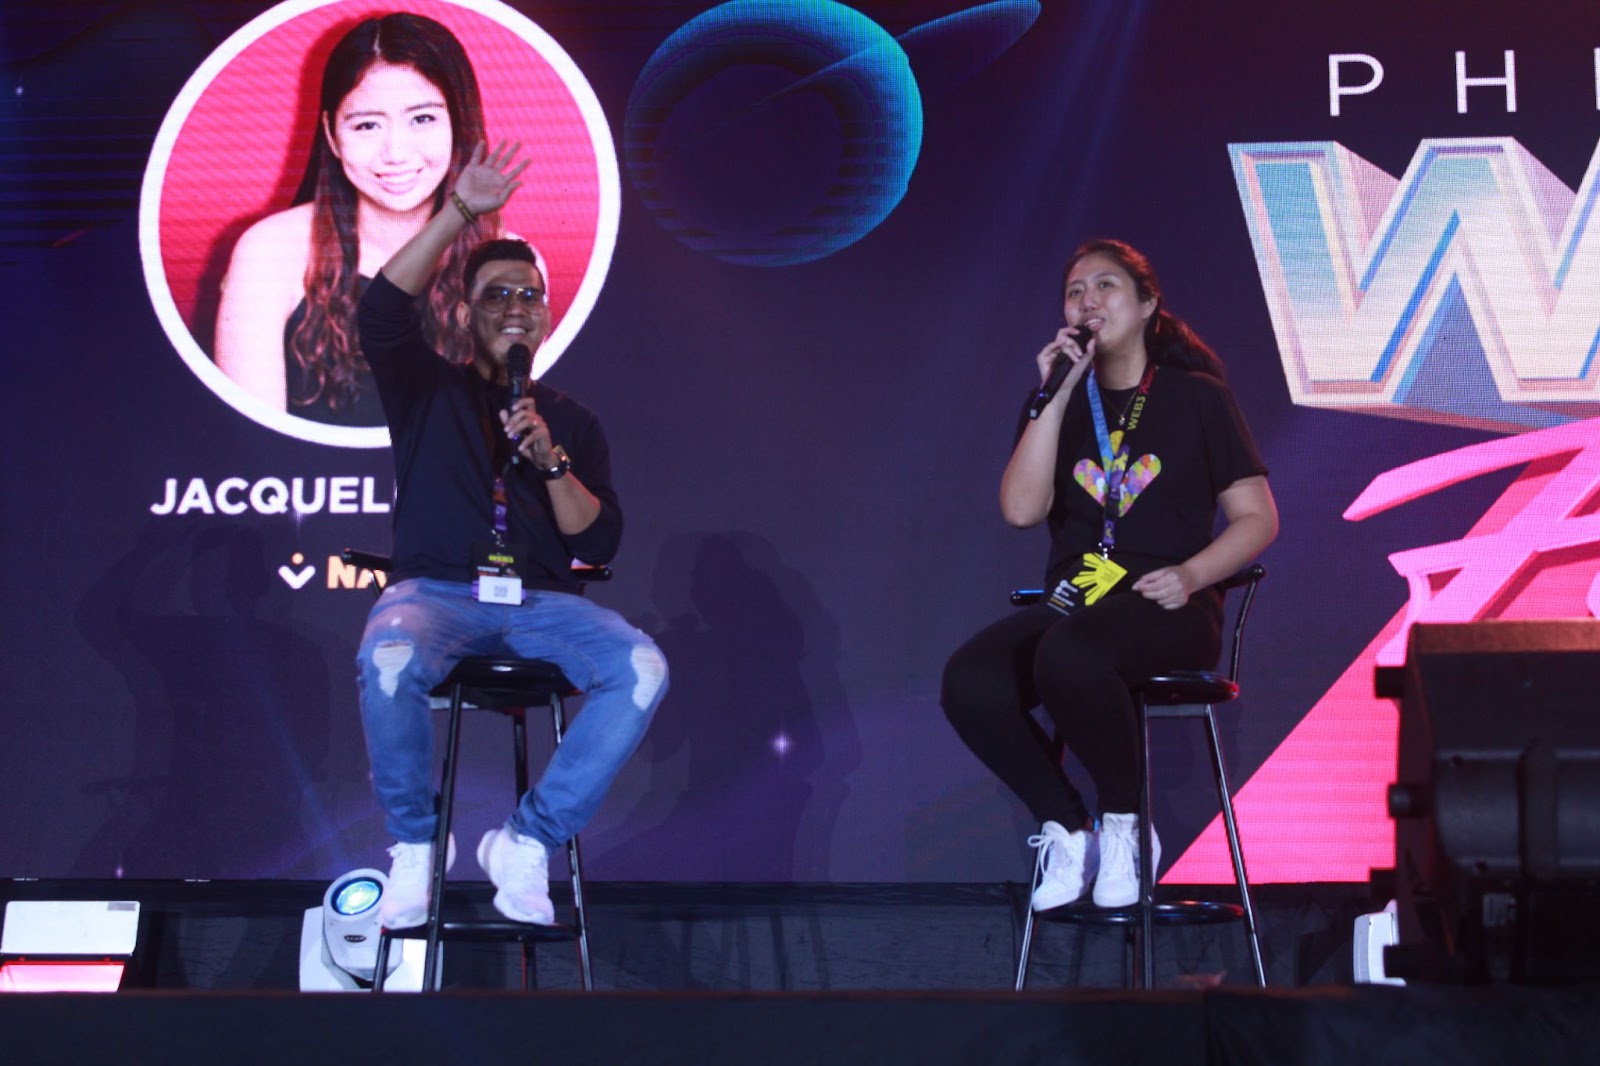 Photo for the Article - [Live – Day 3] Philippine Web3 Festival Recap